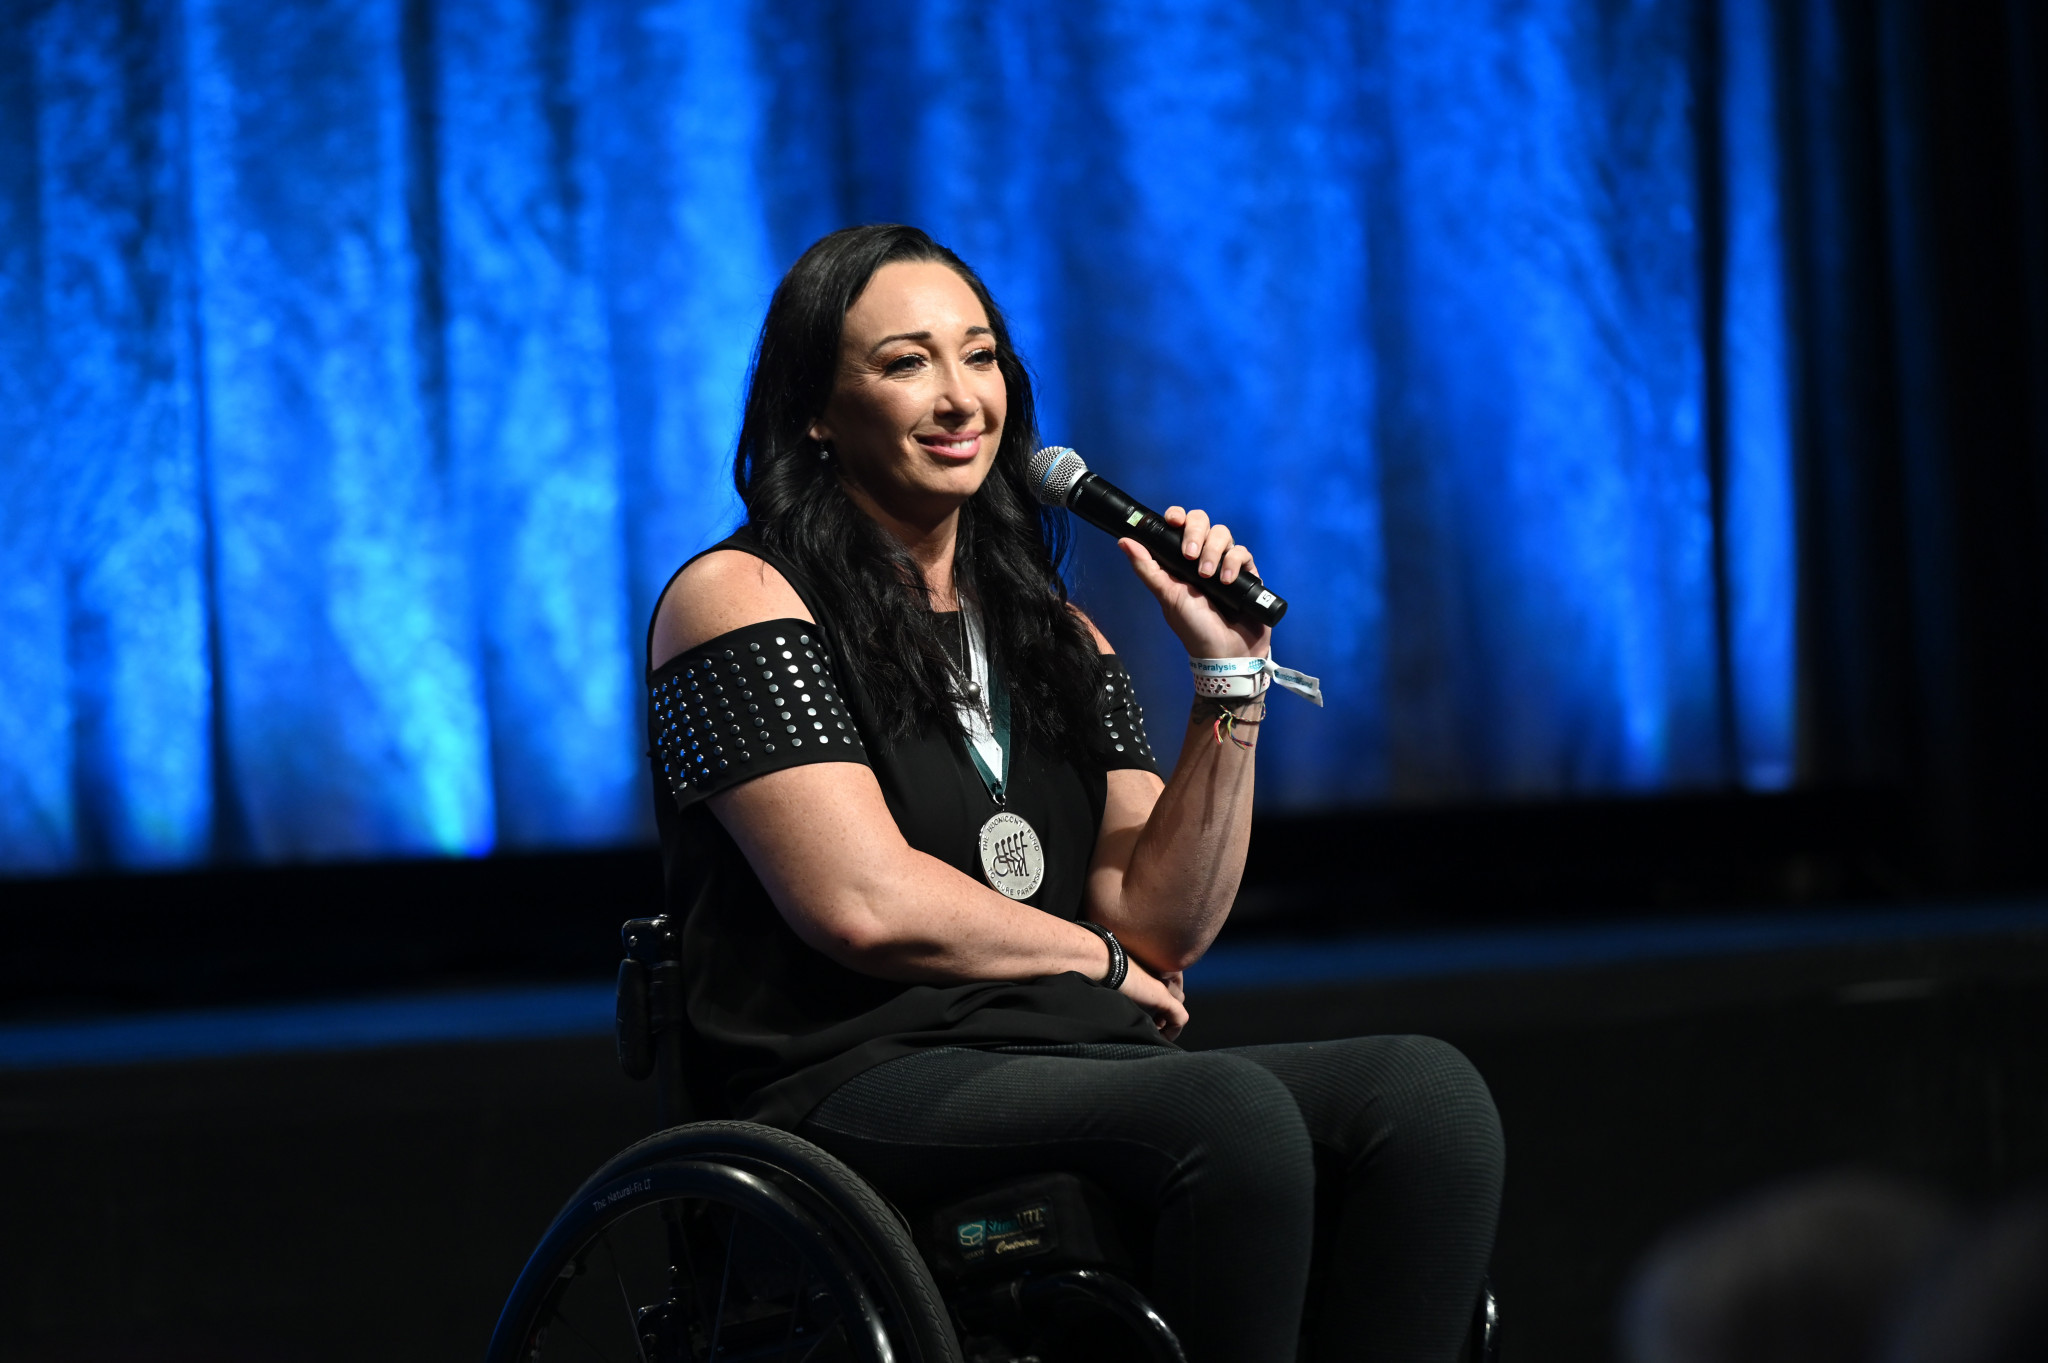 Amy Van Dyken is to receive the United States Olympic and Paralympic Committee's Jesse Owens Olympic Spirit Award ©Getty Images